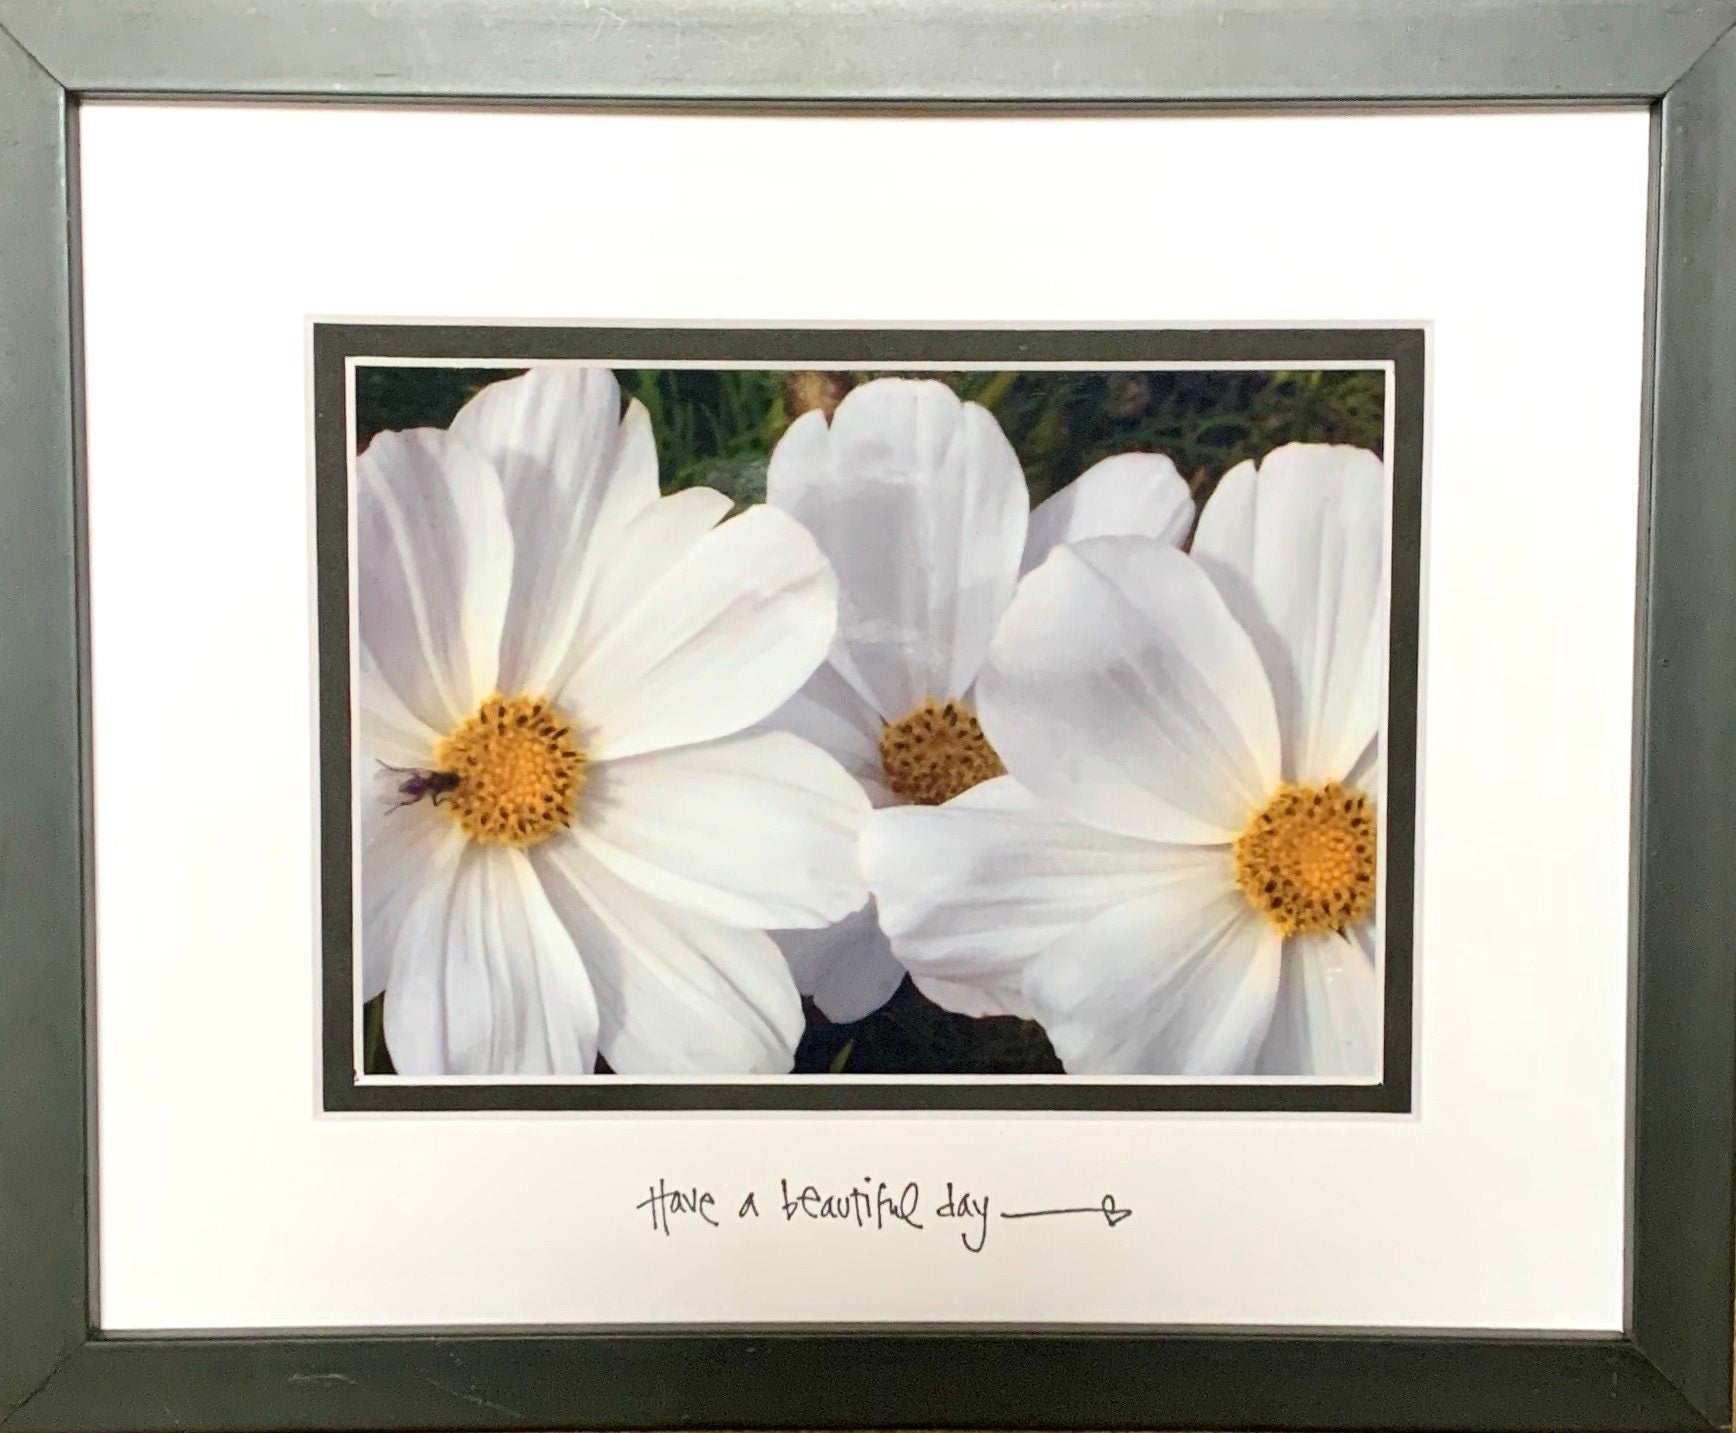 White Daisies Inspirational Quote Matted Photo Original Flower Photography Colorful decor Garden Nature accent flower lover gift